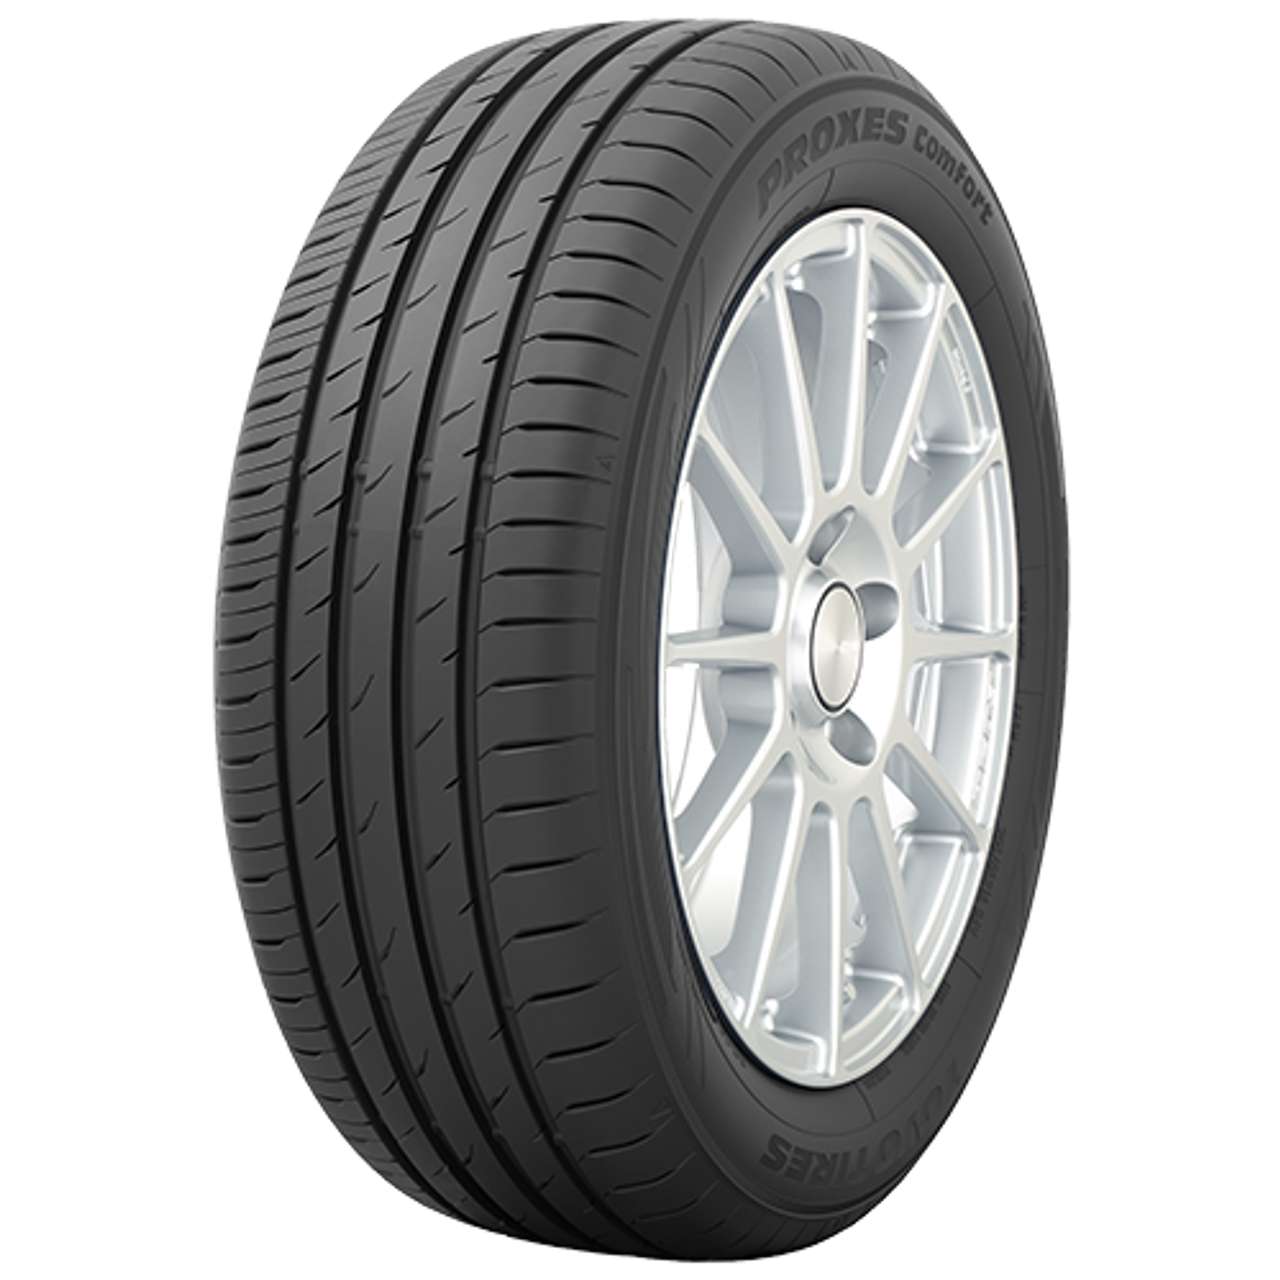 TOYO PROXES COMFORT 225/50R17 98W MFS BSW